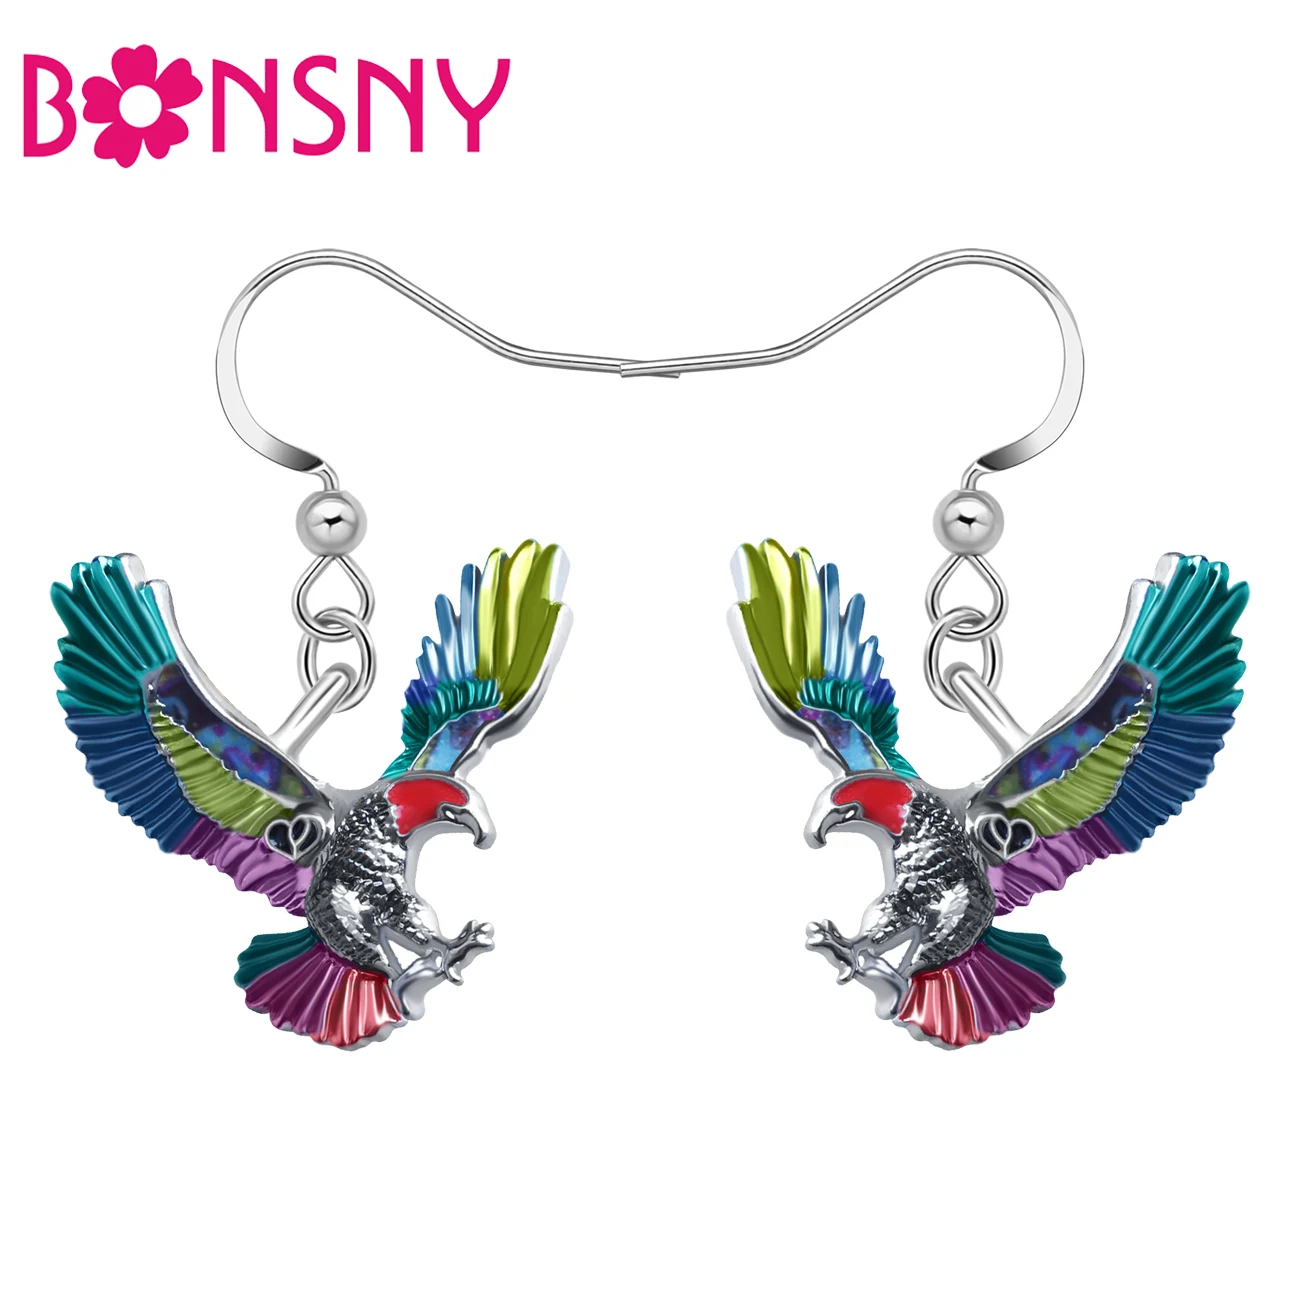 

Bonsny Enamel Alloy Metal Floral Flying Eagle Dangle Earrings Birds Drop Charms Fashion Accessories For Women Girls Teens Gifts